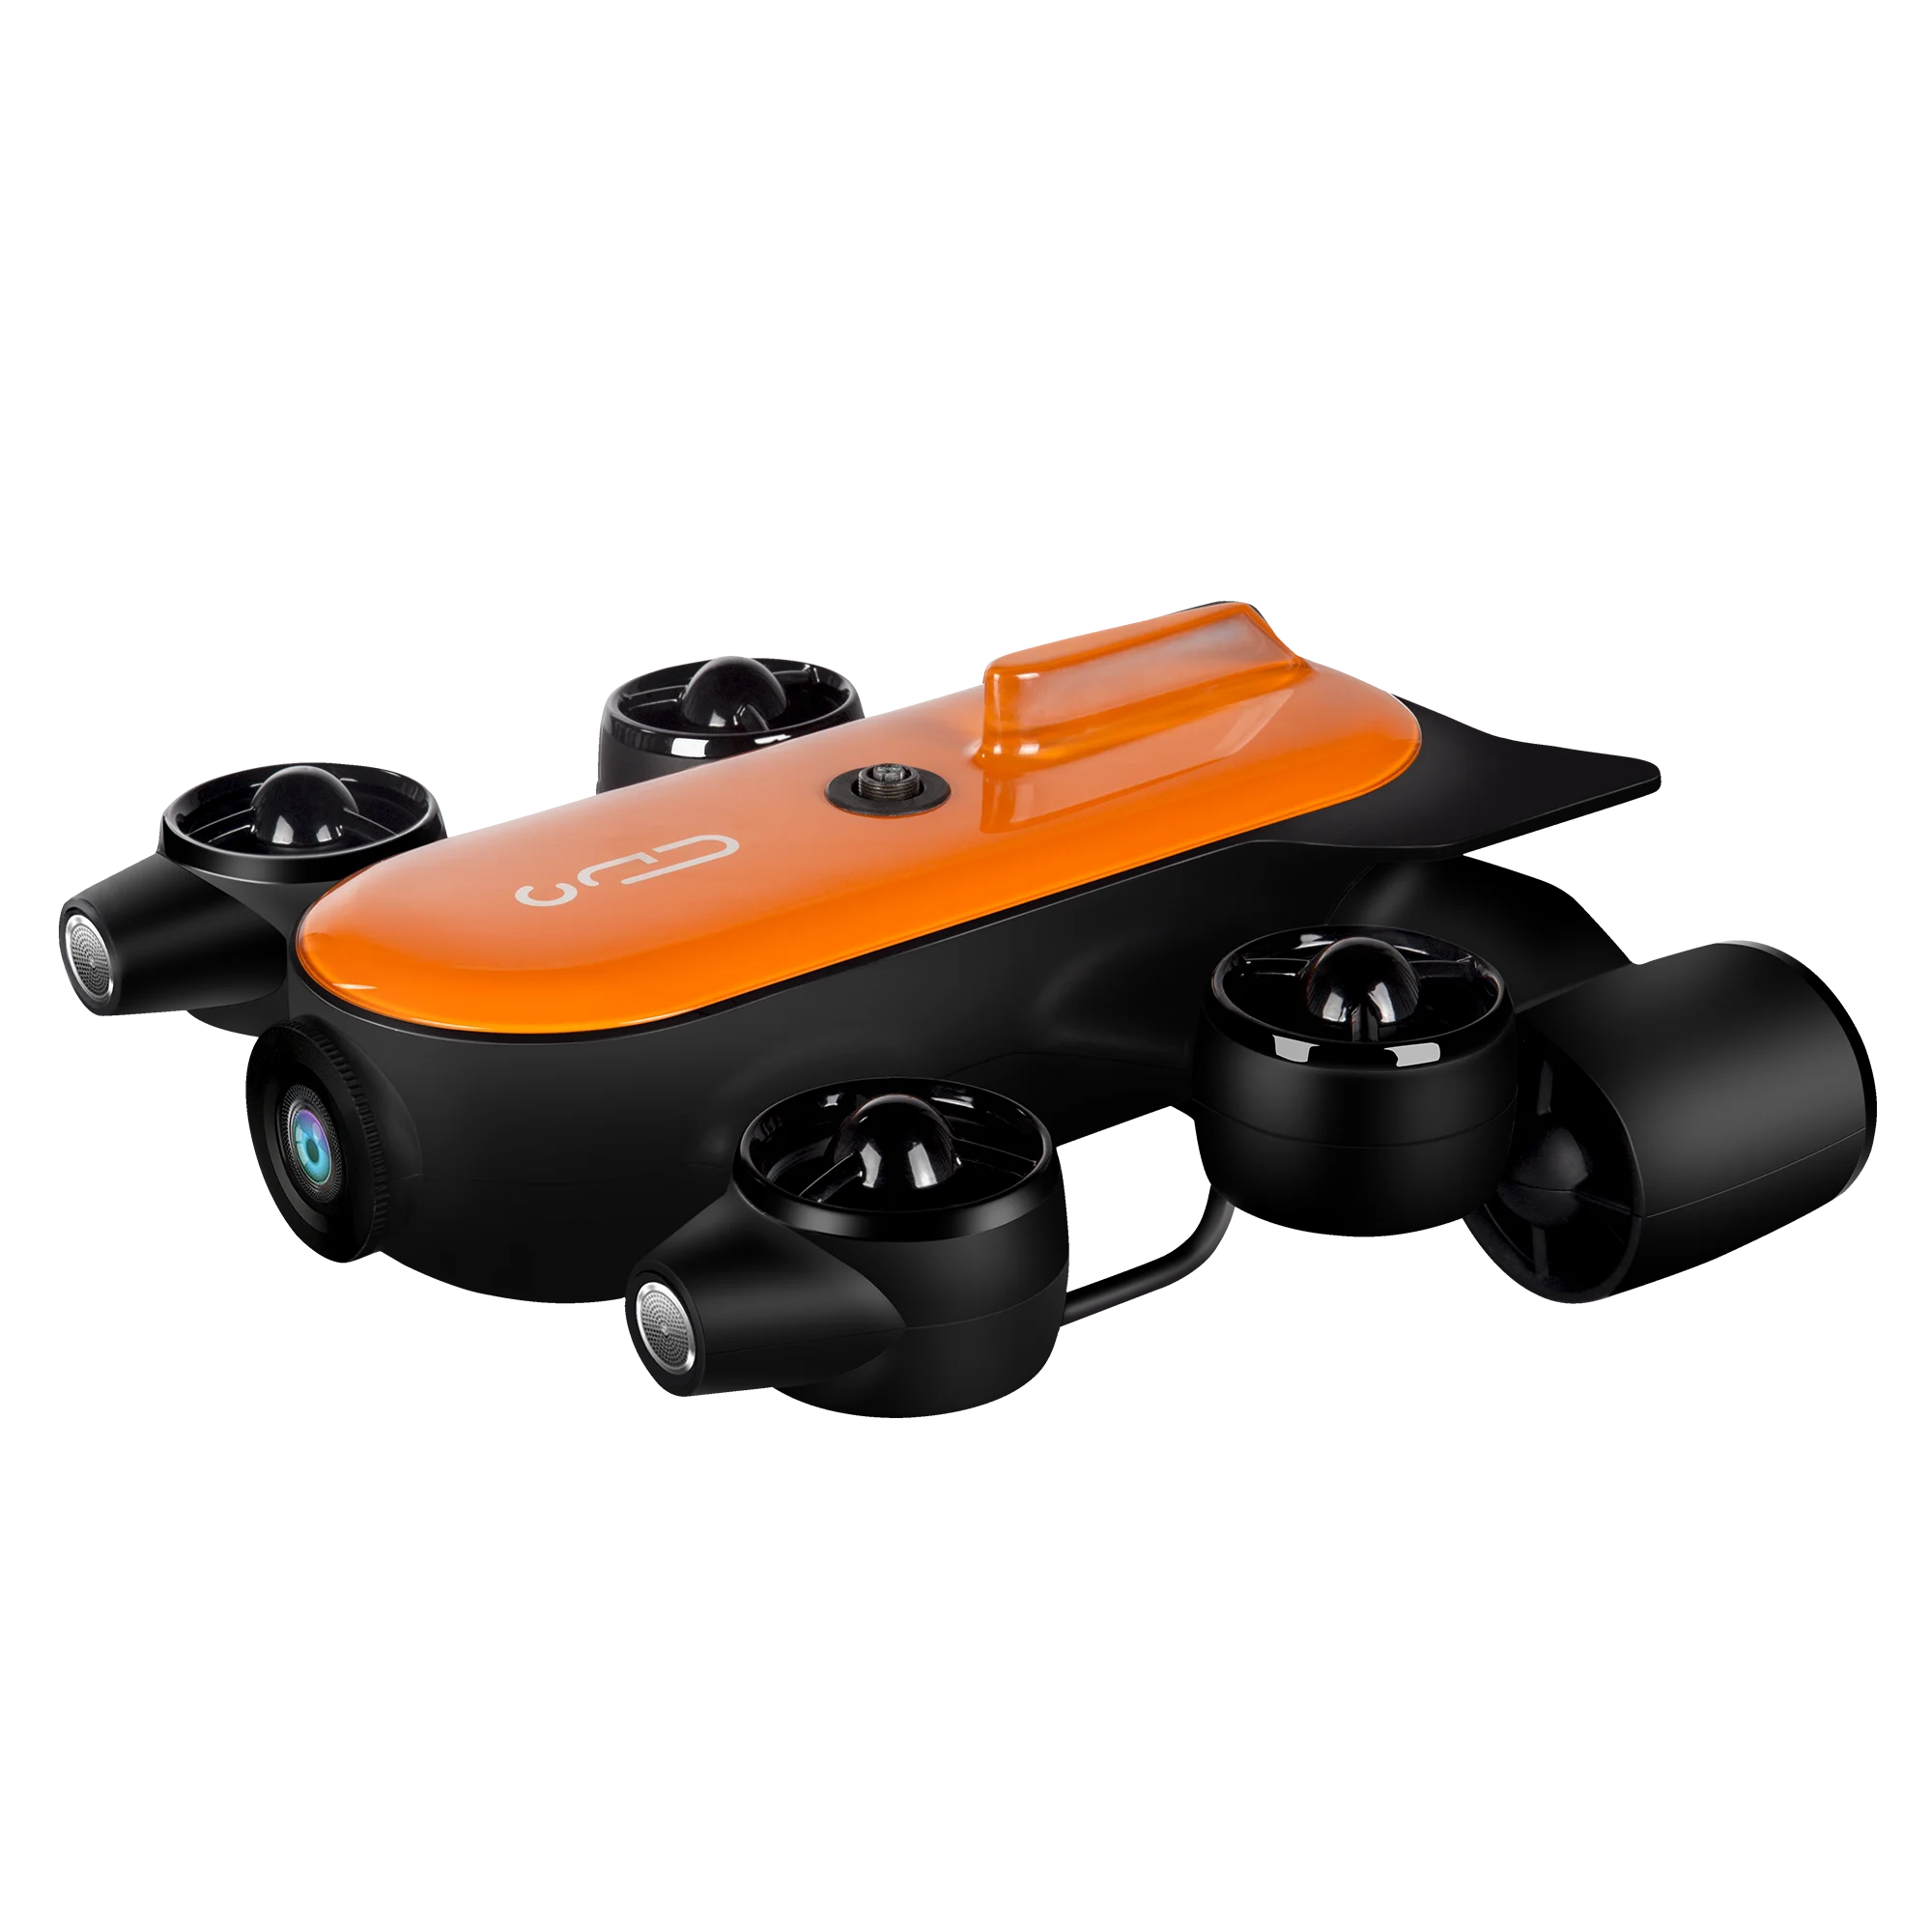 

sea drone T1 speed at 2 m/s in sea with 4K UHD Camera 3000LM LED dive 150 meters deep sea real-time video of underwater drone, Orange